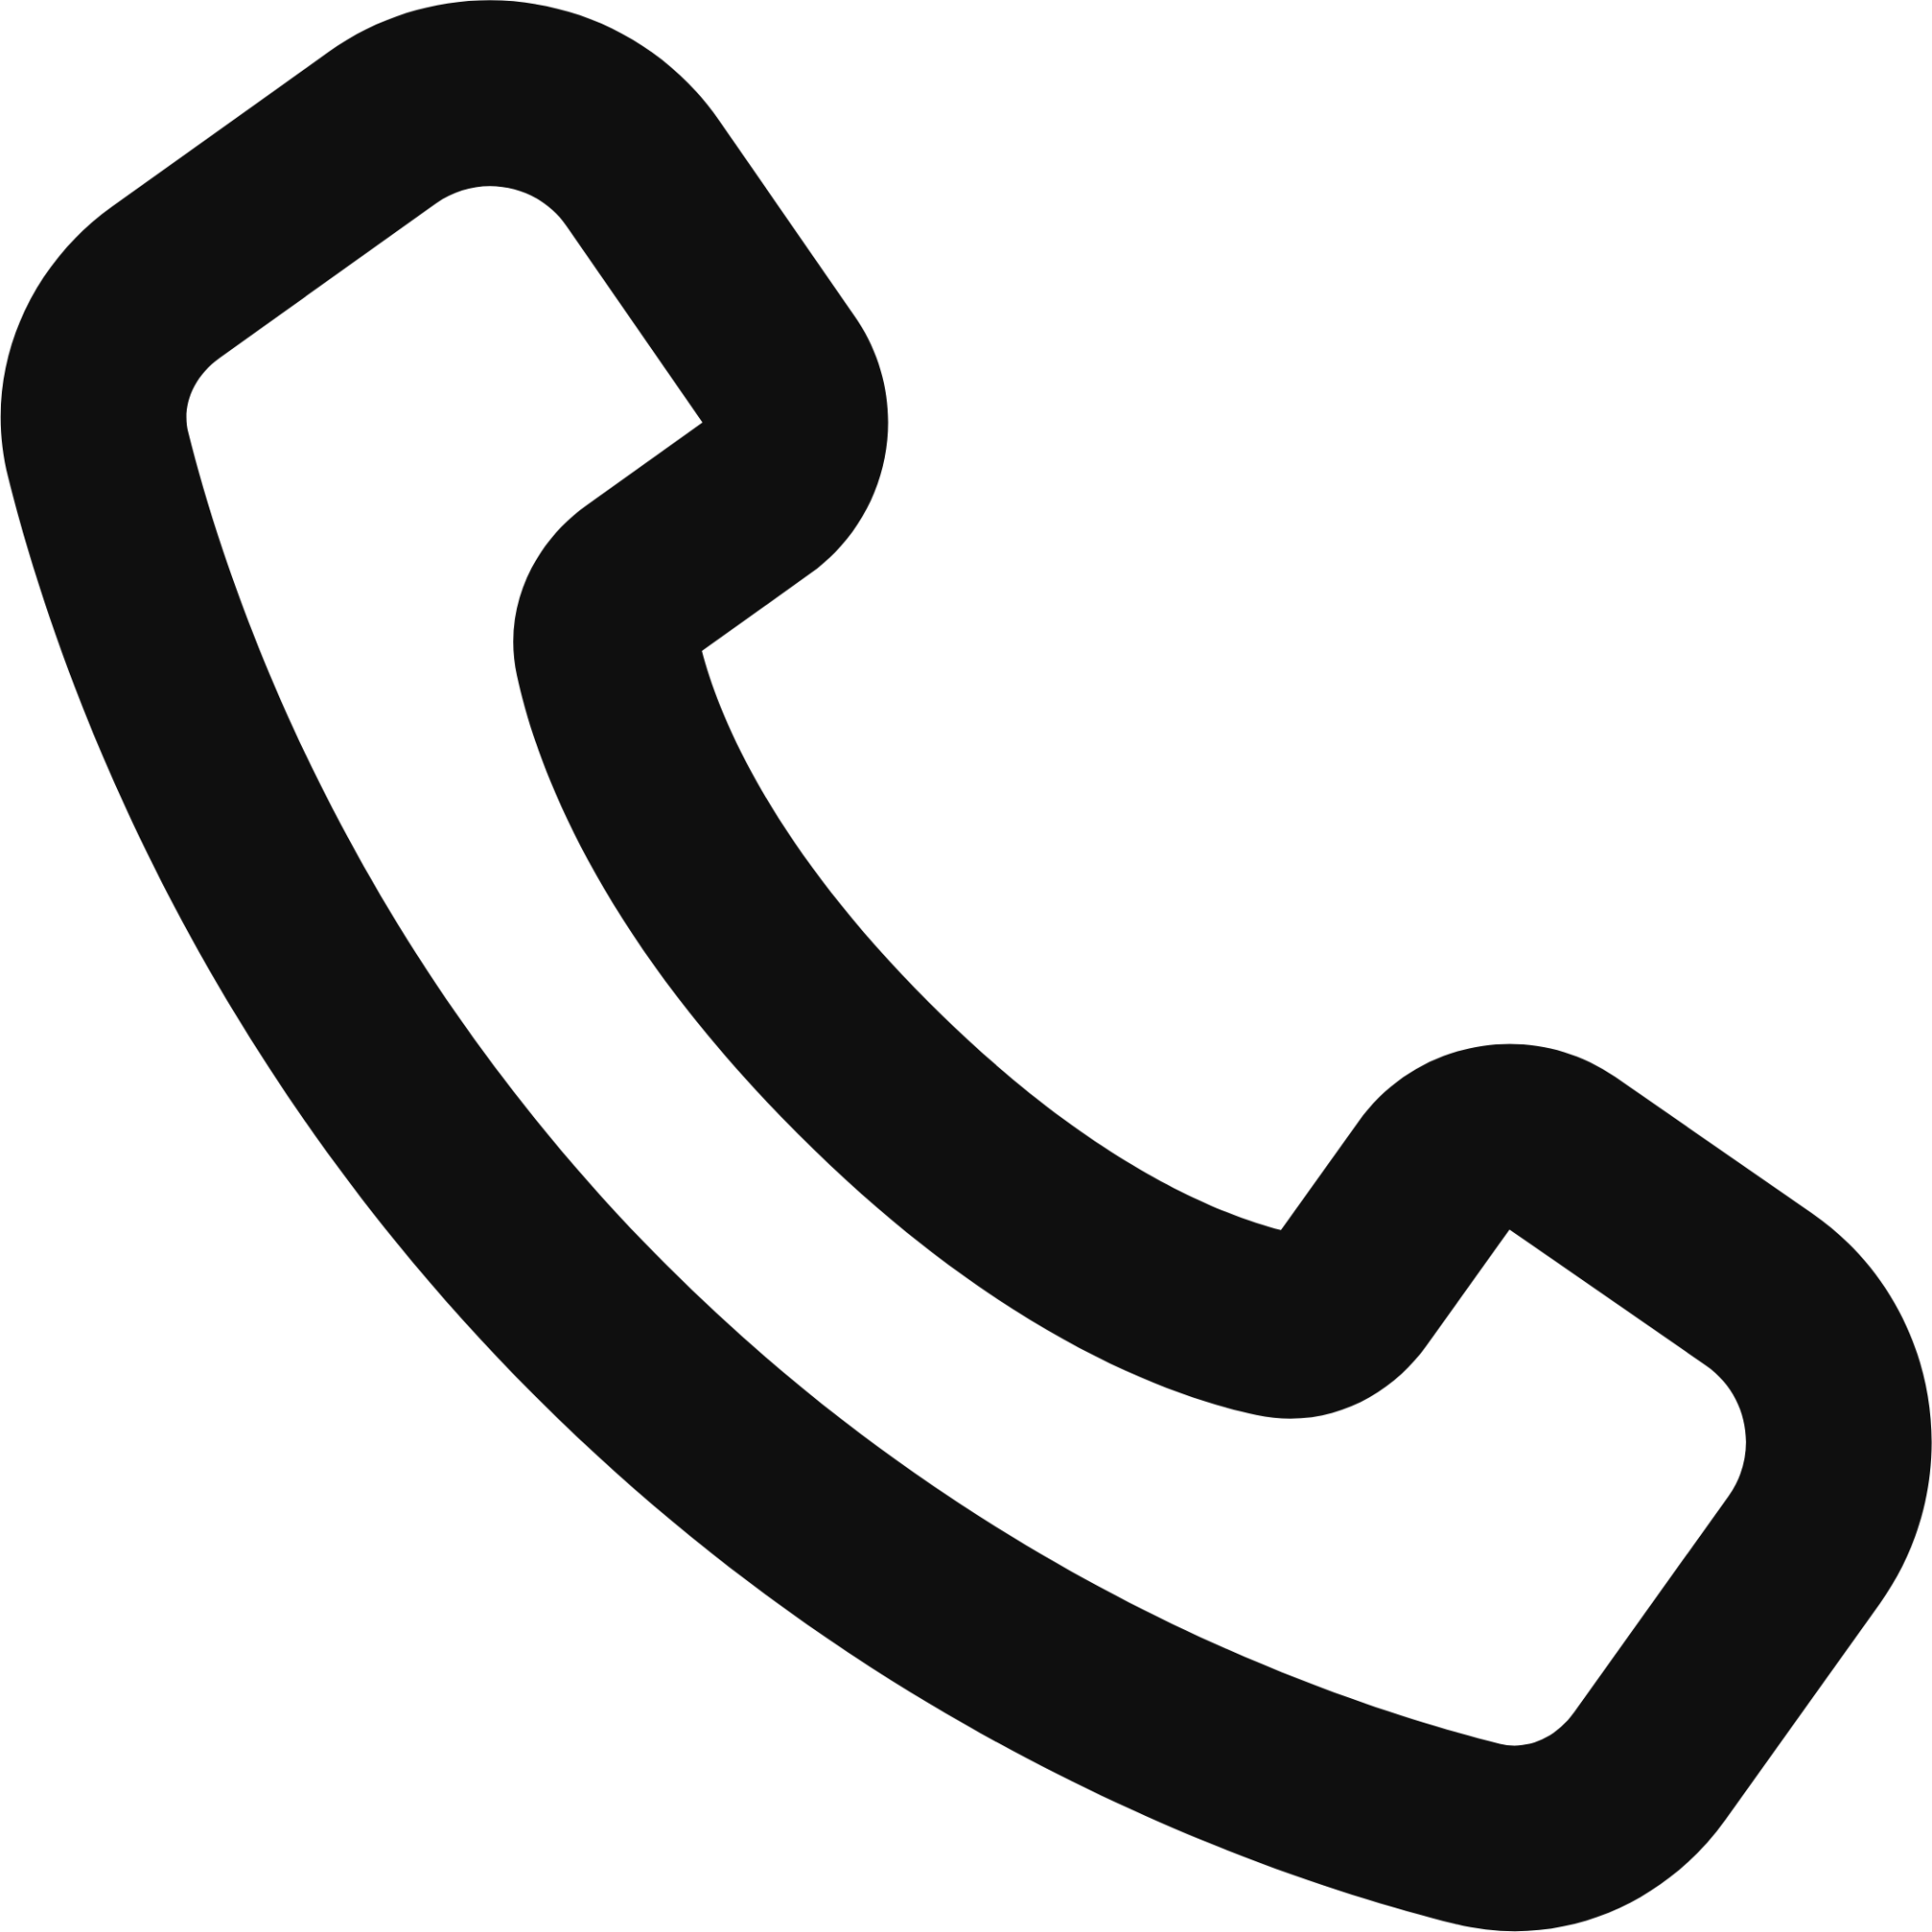 call receive icon